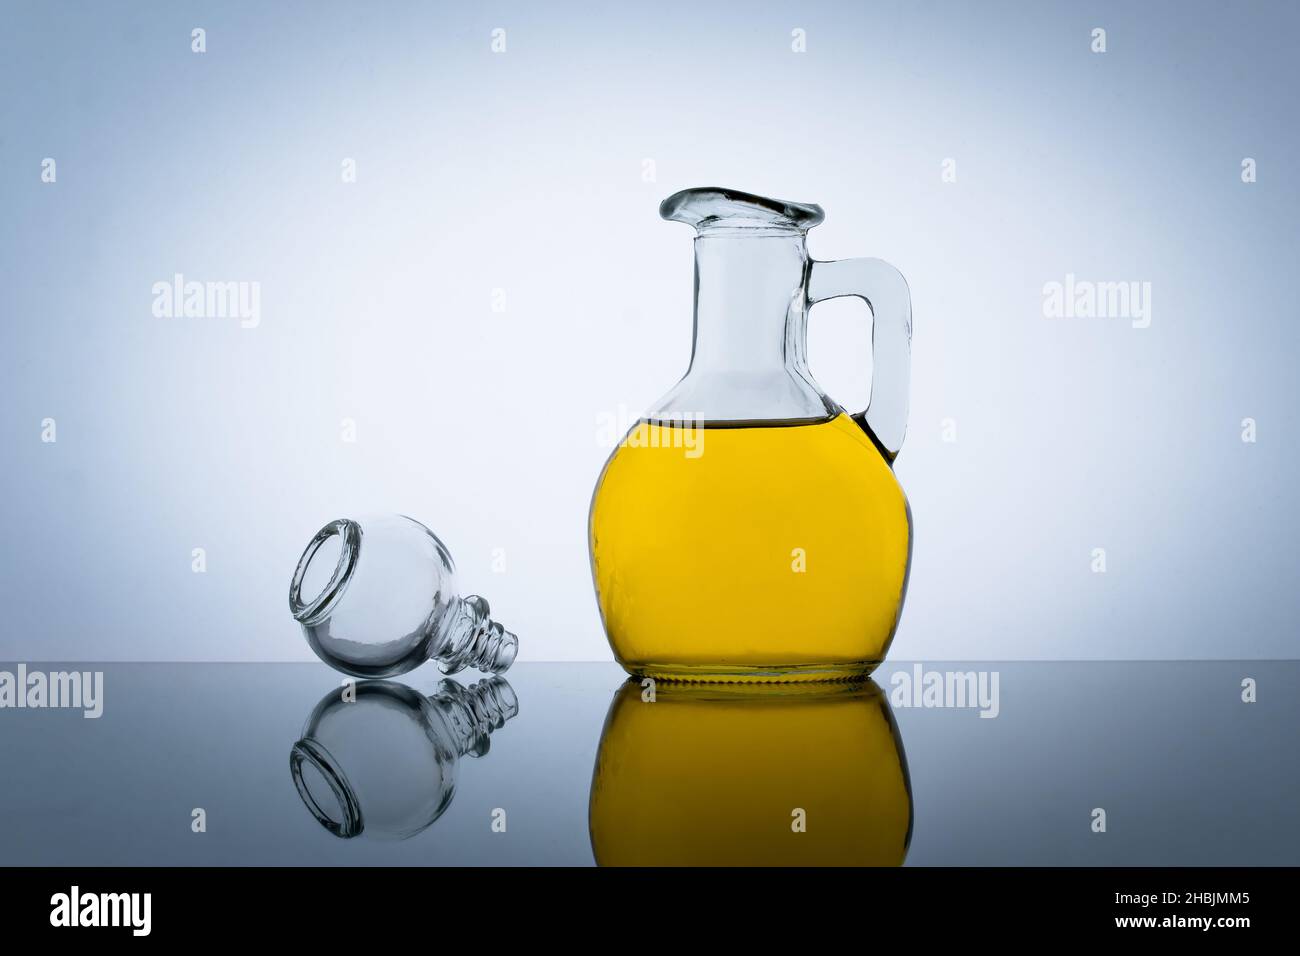 Olive oil bottle, vegetable salad flavoring. Gray background. Yellow cooking oil in a glass jar Stock Photo